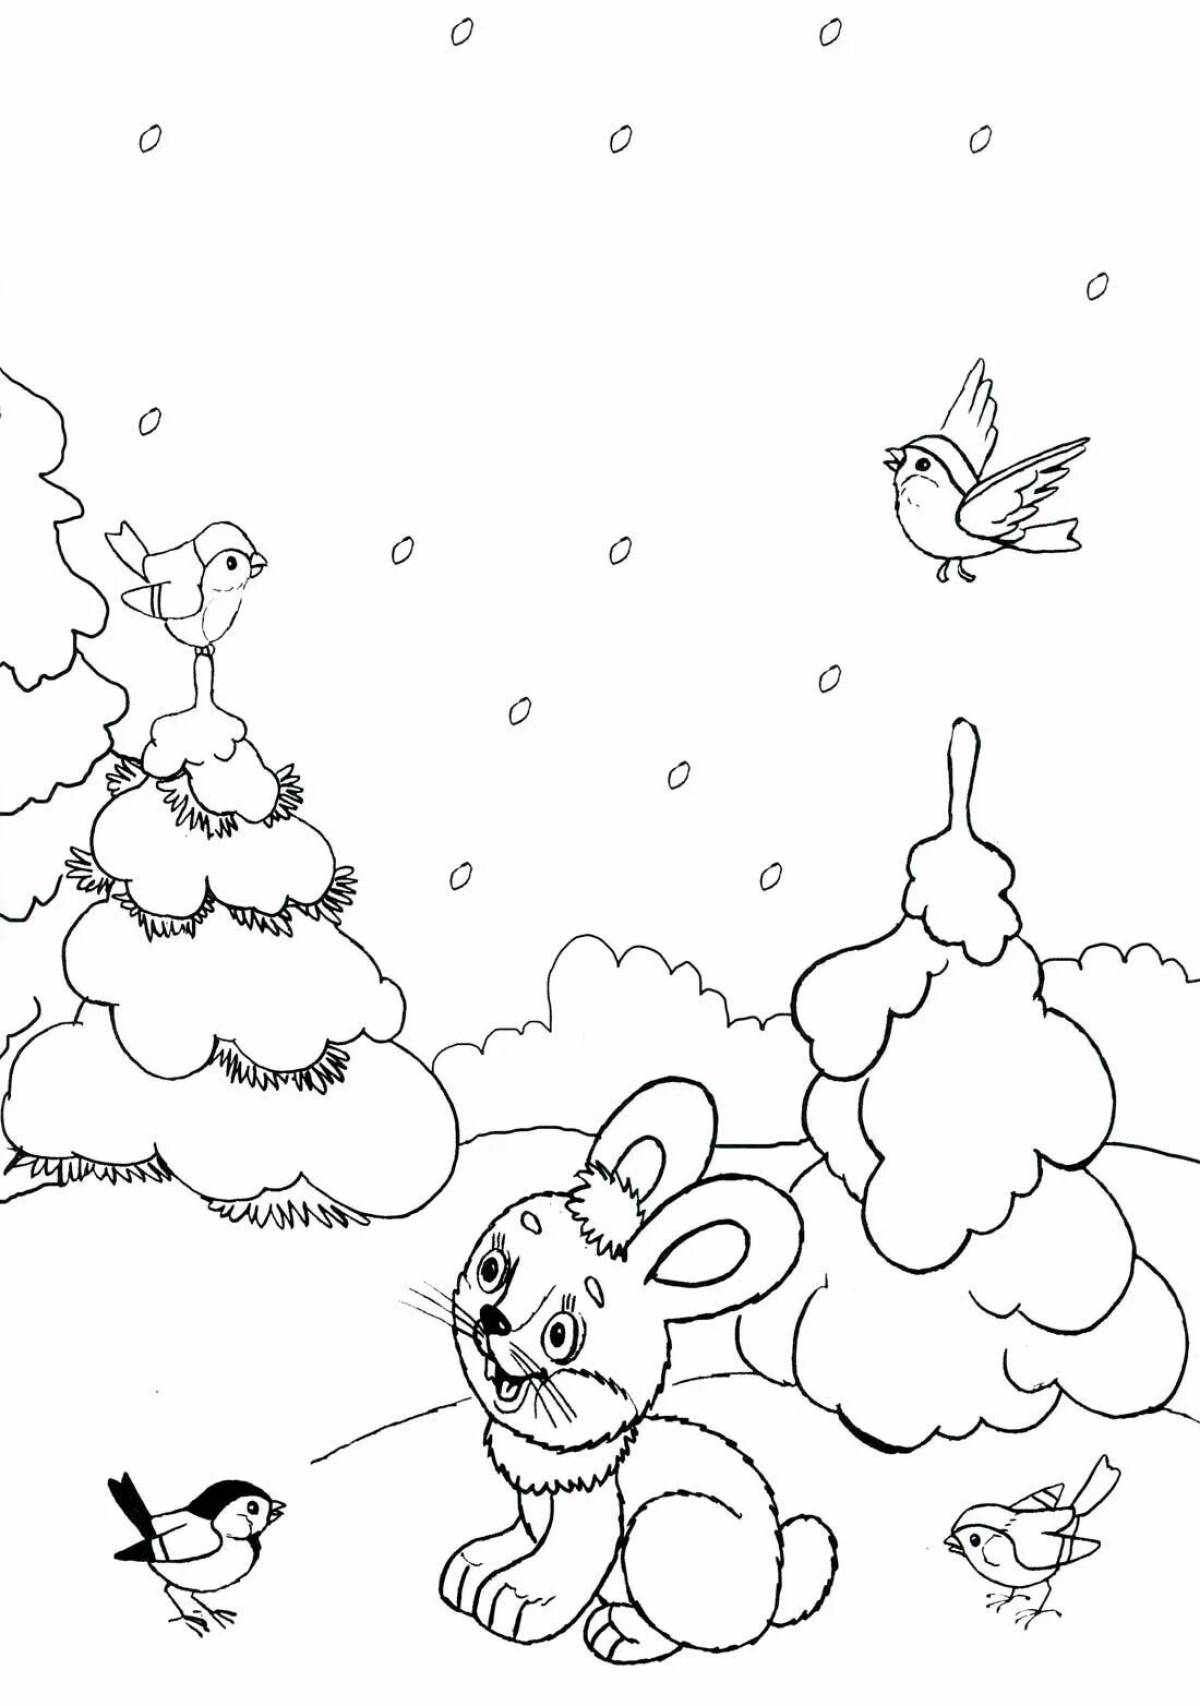 Shimmering bunny winter coloring book